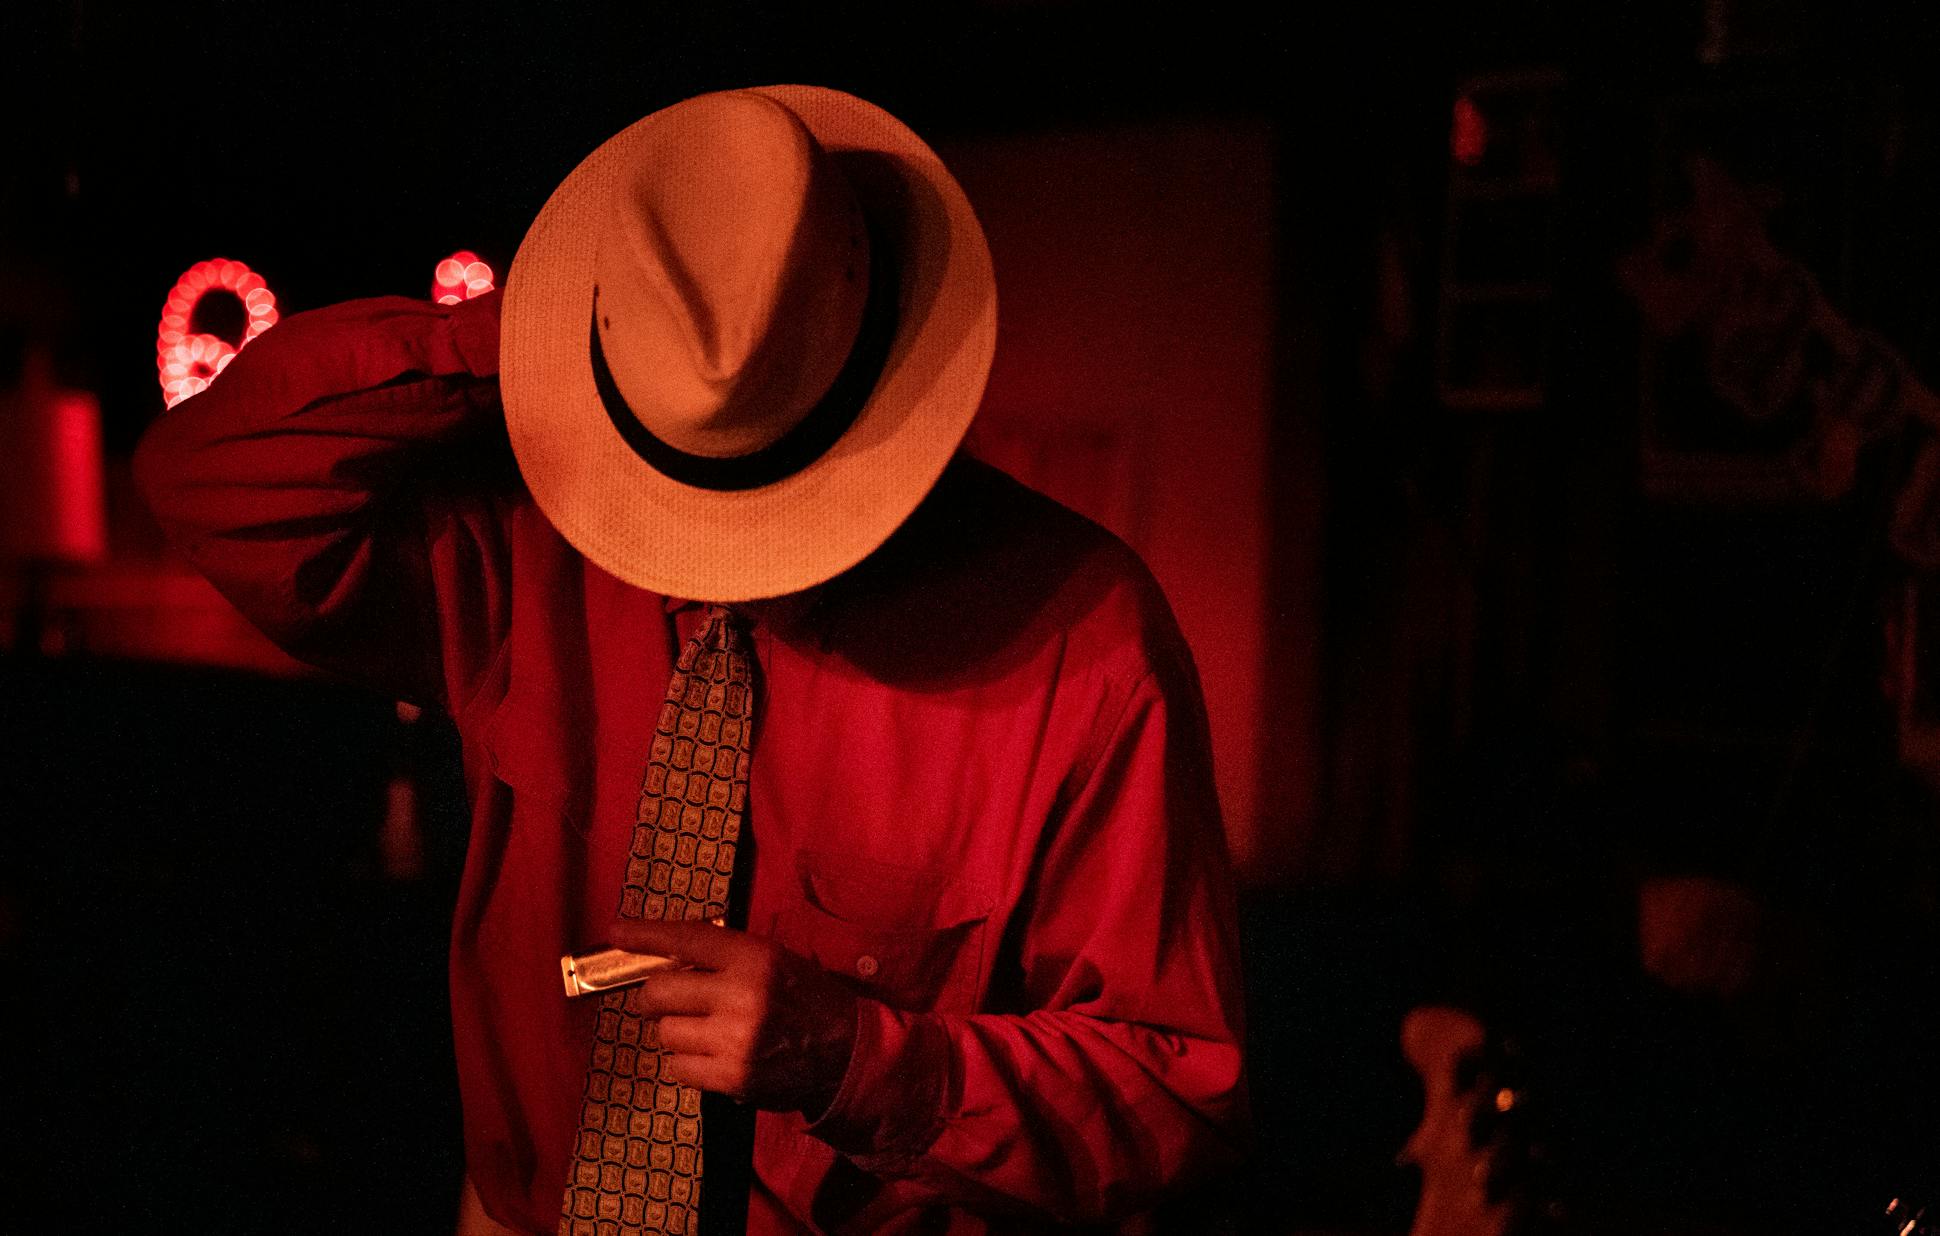 Oklahoma guitarist/harmonica player Watermelon Slim (Bill Homans III) sat in at Red's Lounge while passing through Clarksdale. 